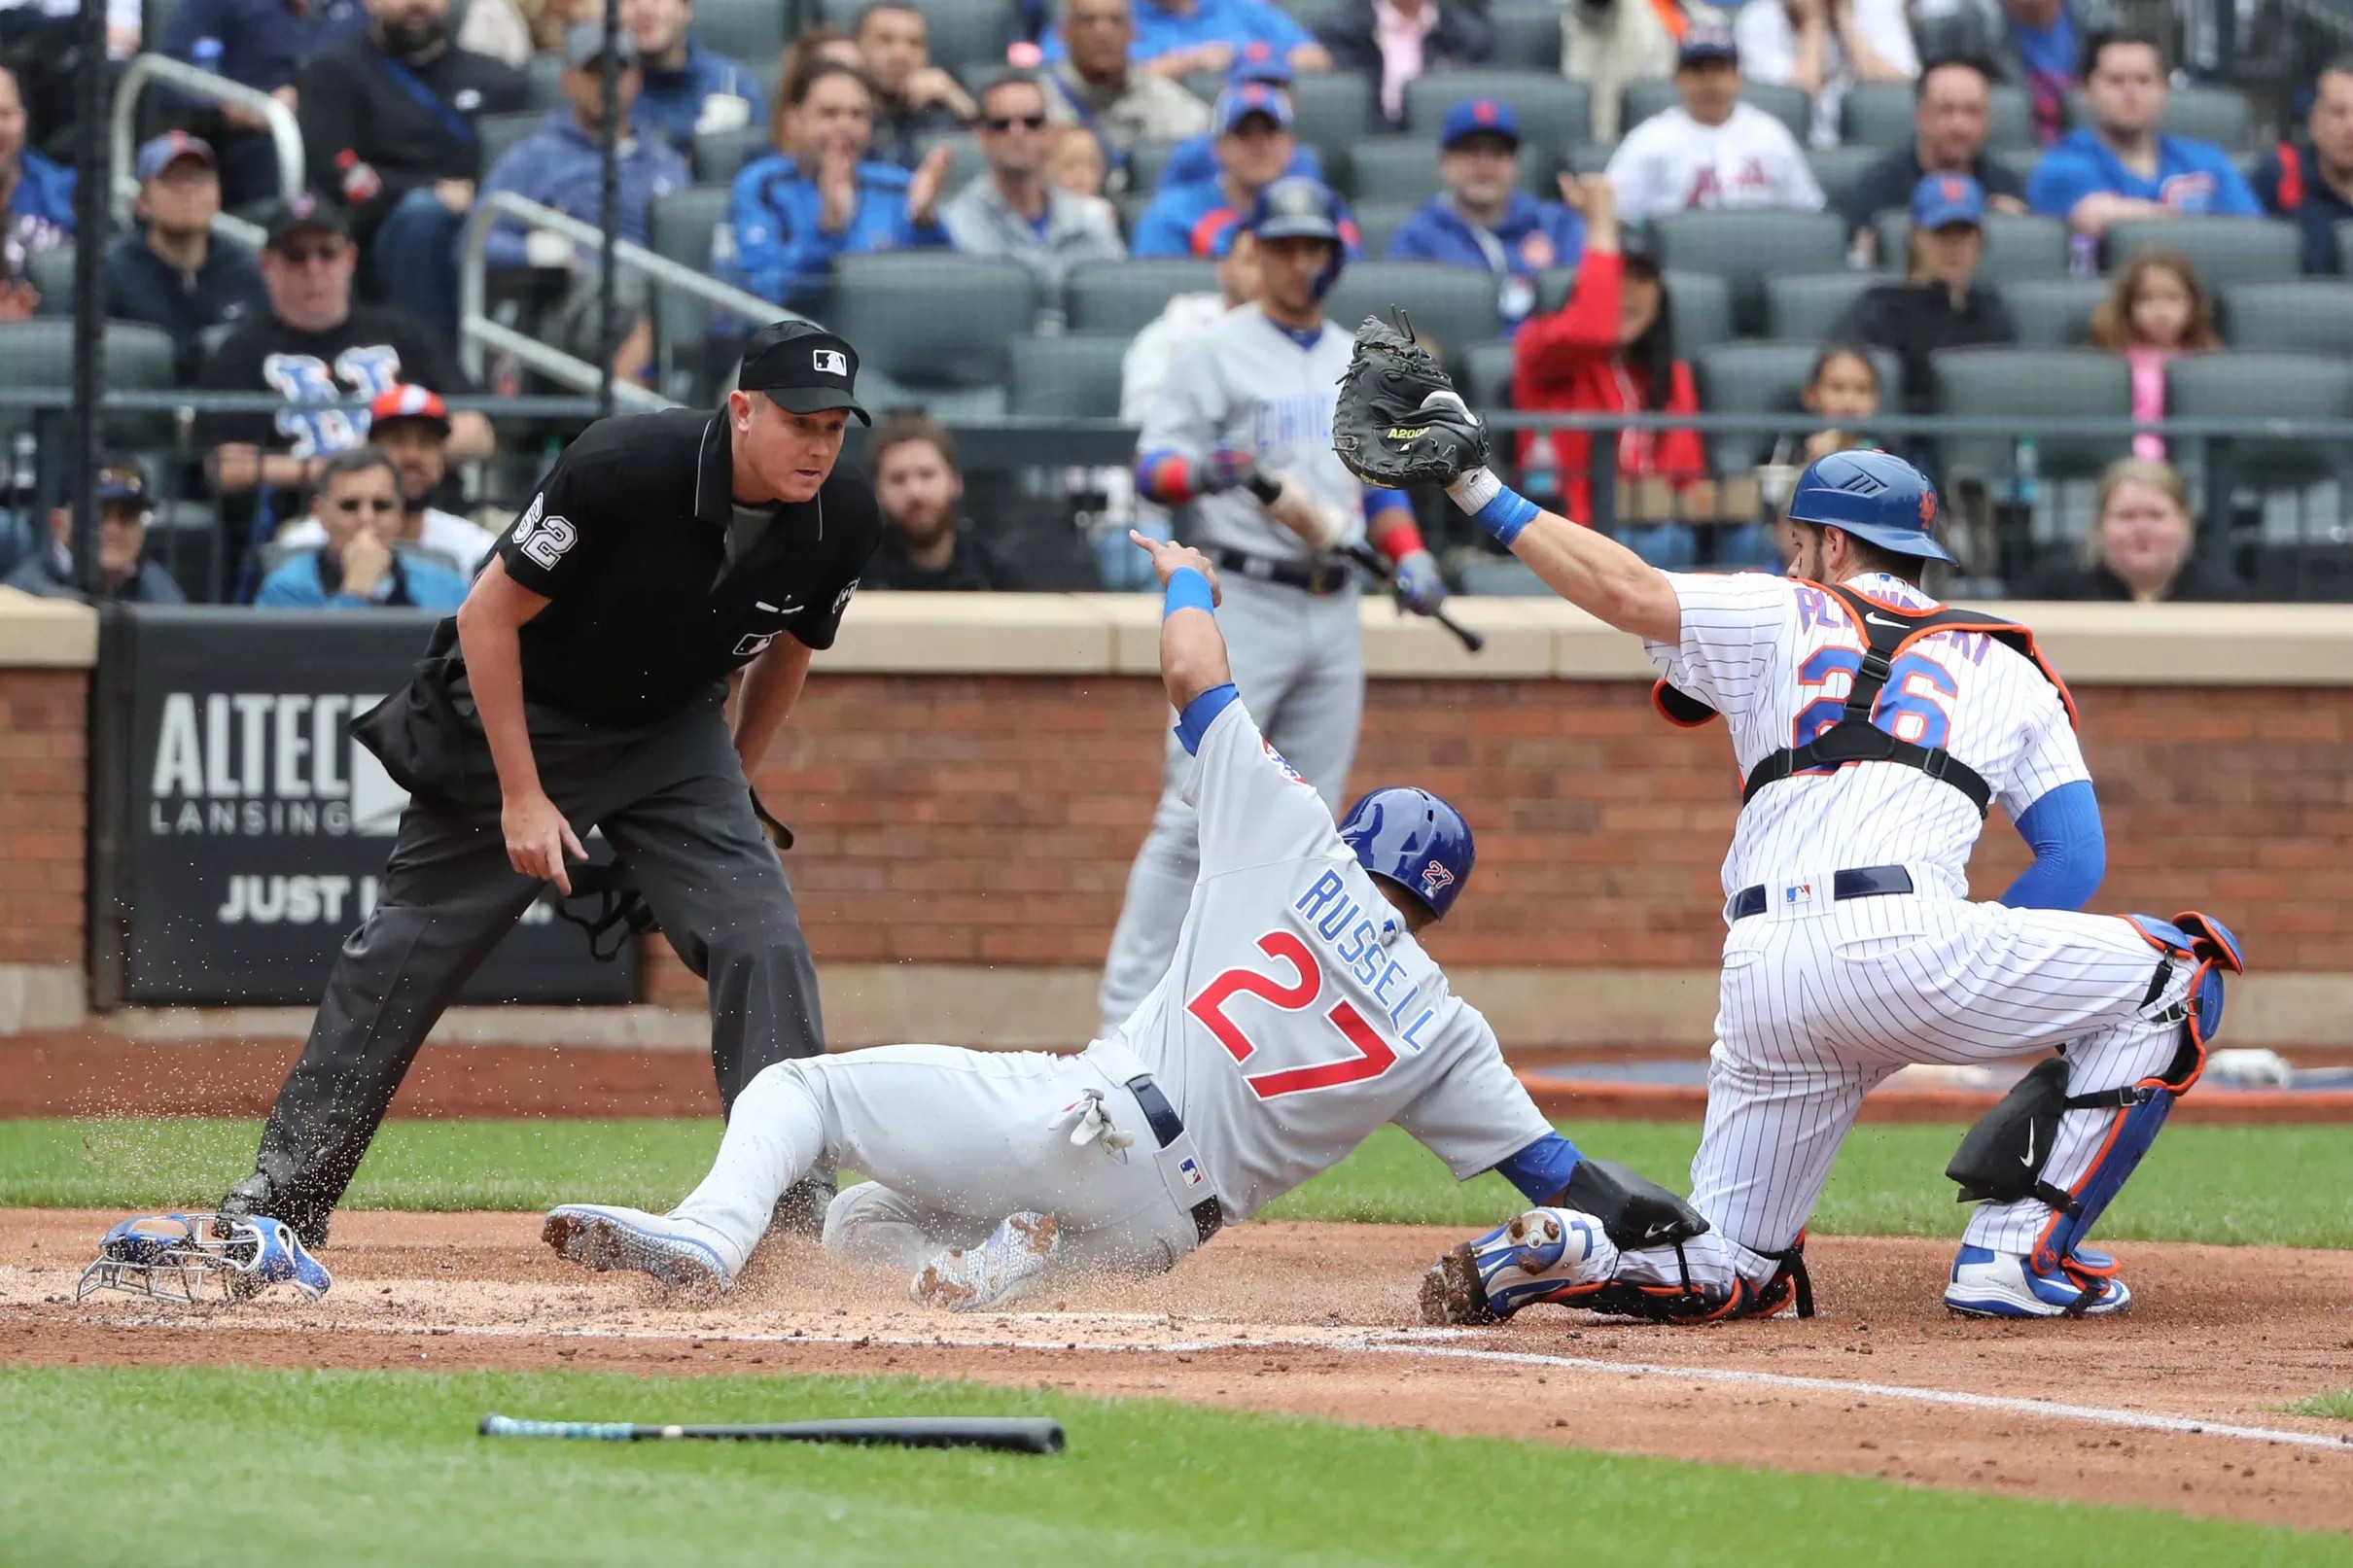 Final Score Cubs 2, Mets 0 — At least they didn’t get nohit